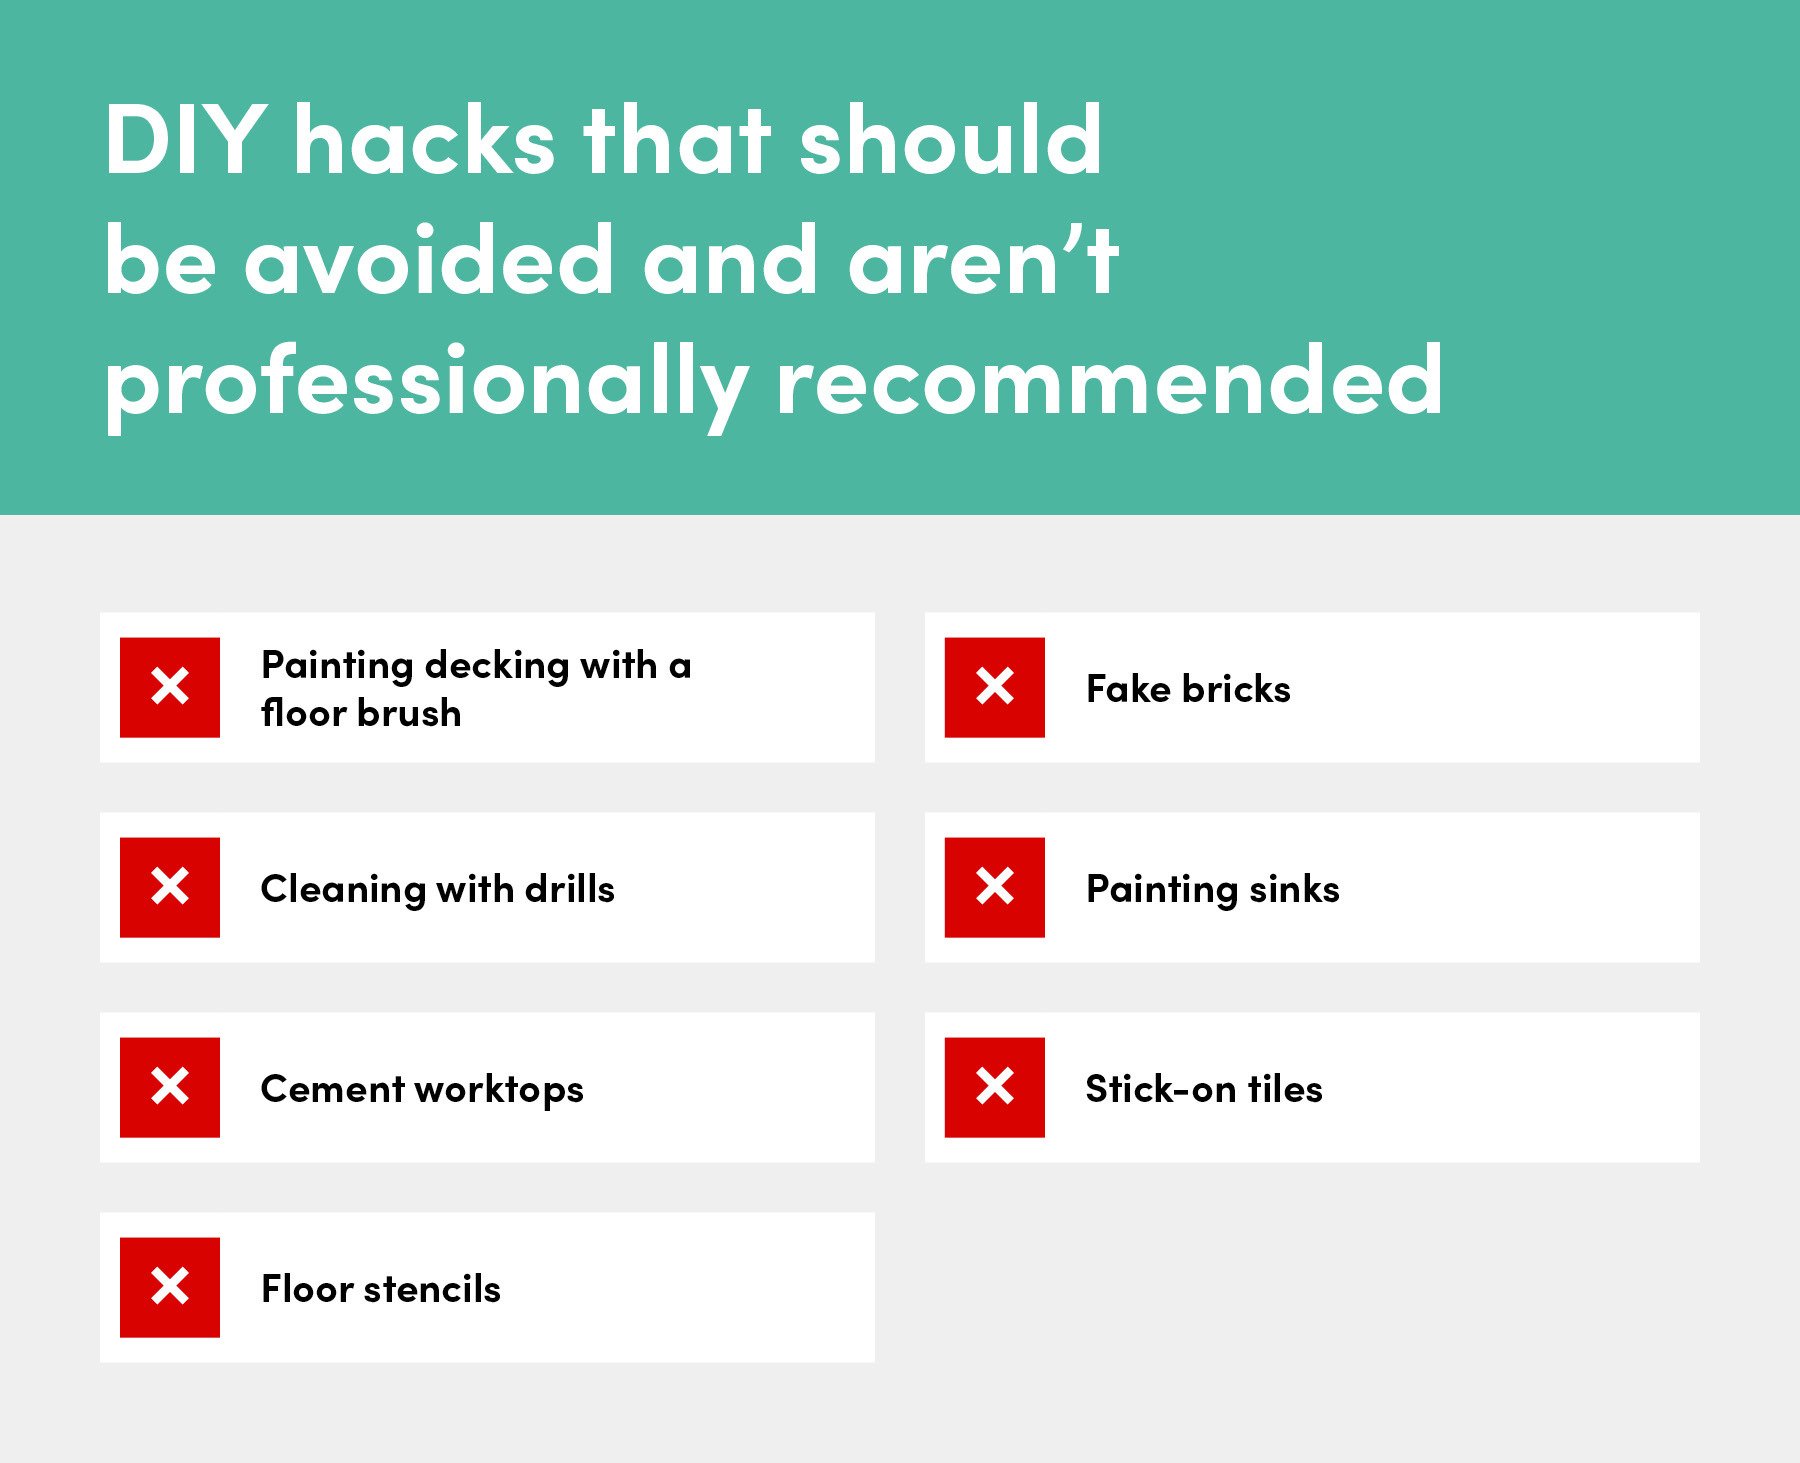 Table of DIY TikTok hacks that aren't professionally recommended